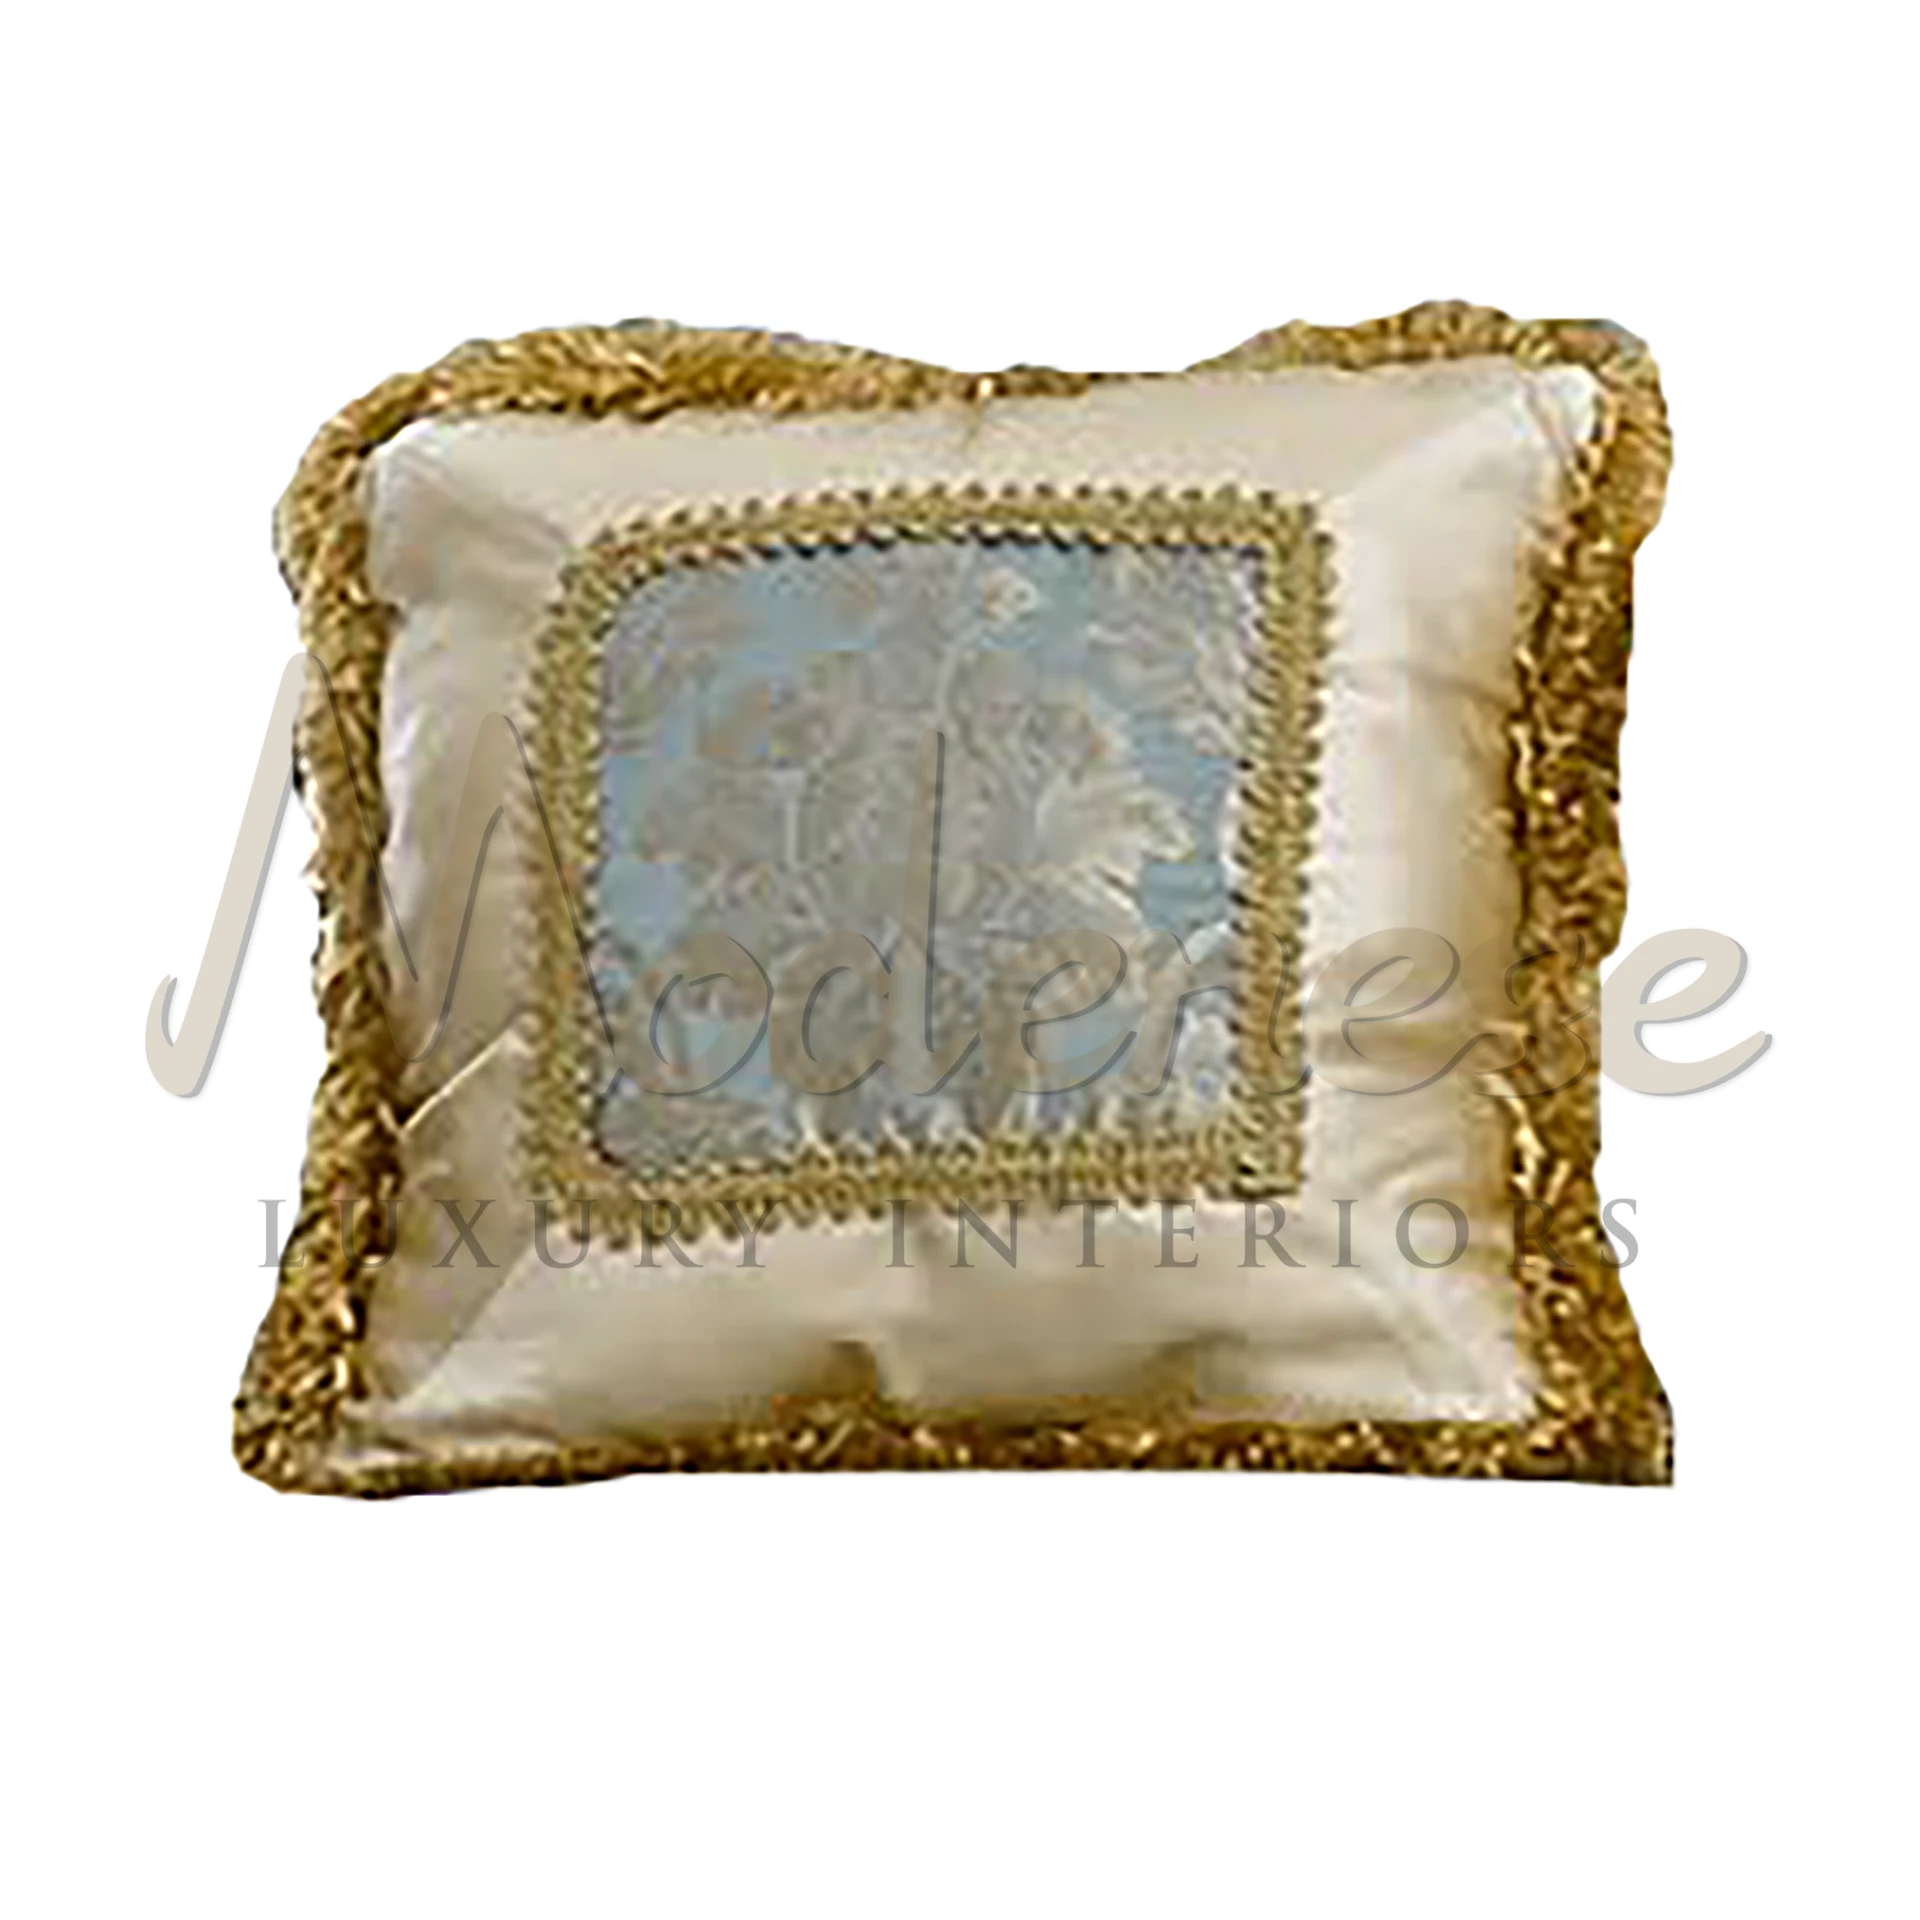 Exquisite Pillow: Showcasing intricate designs and superior craftsmanship with embroidery and beading for elegant spaces.